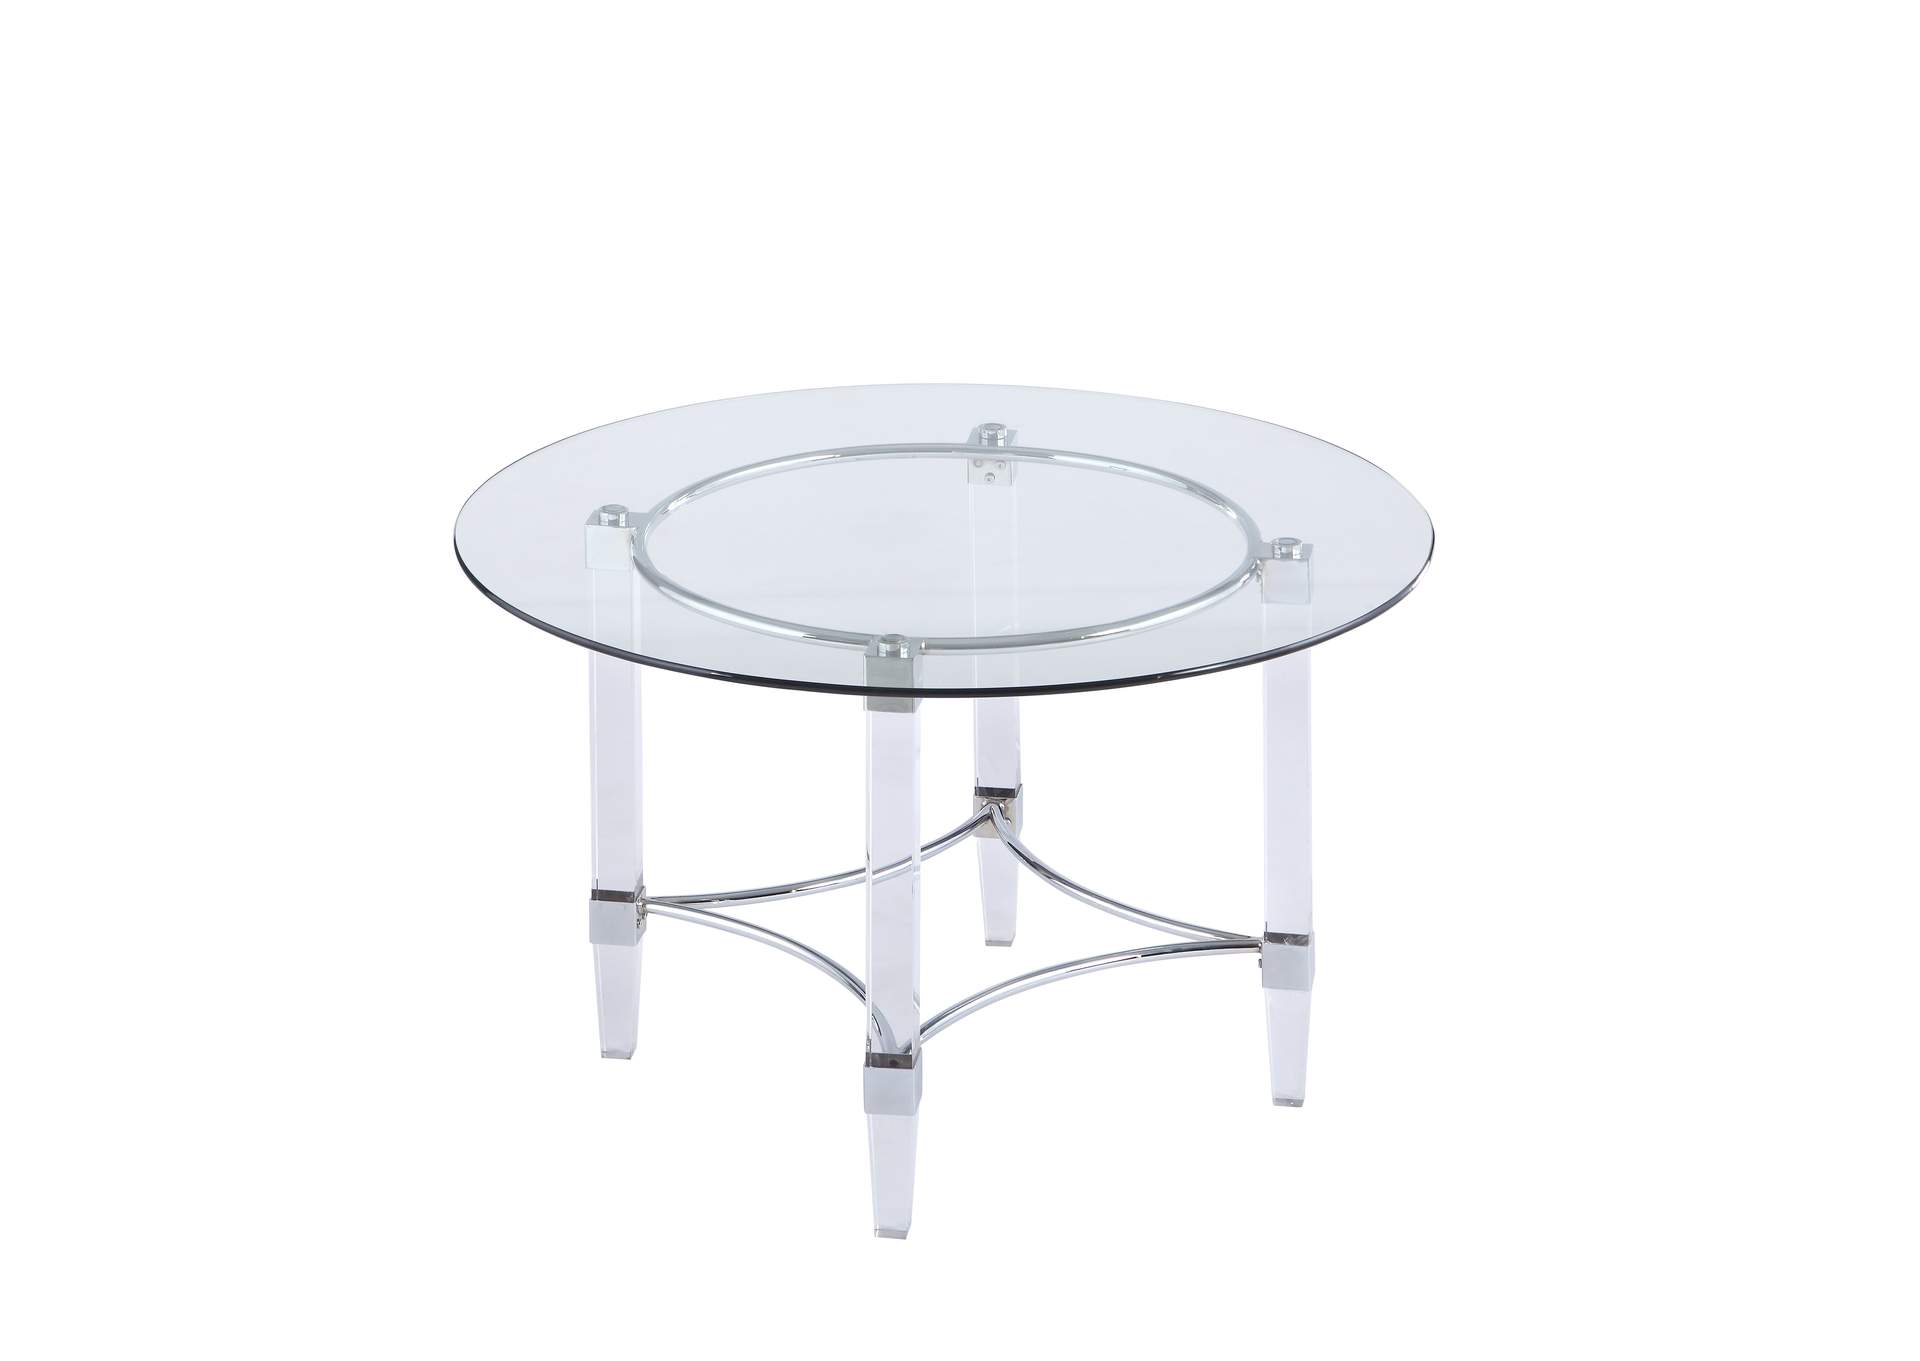 Contemporary Round Glass Top Dining Table,Chintaly Imports